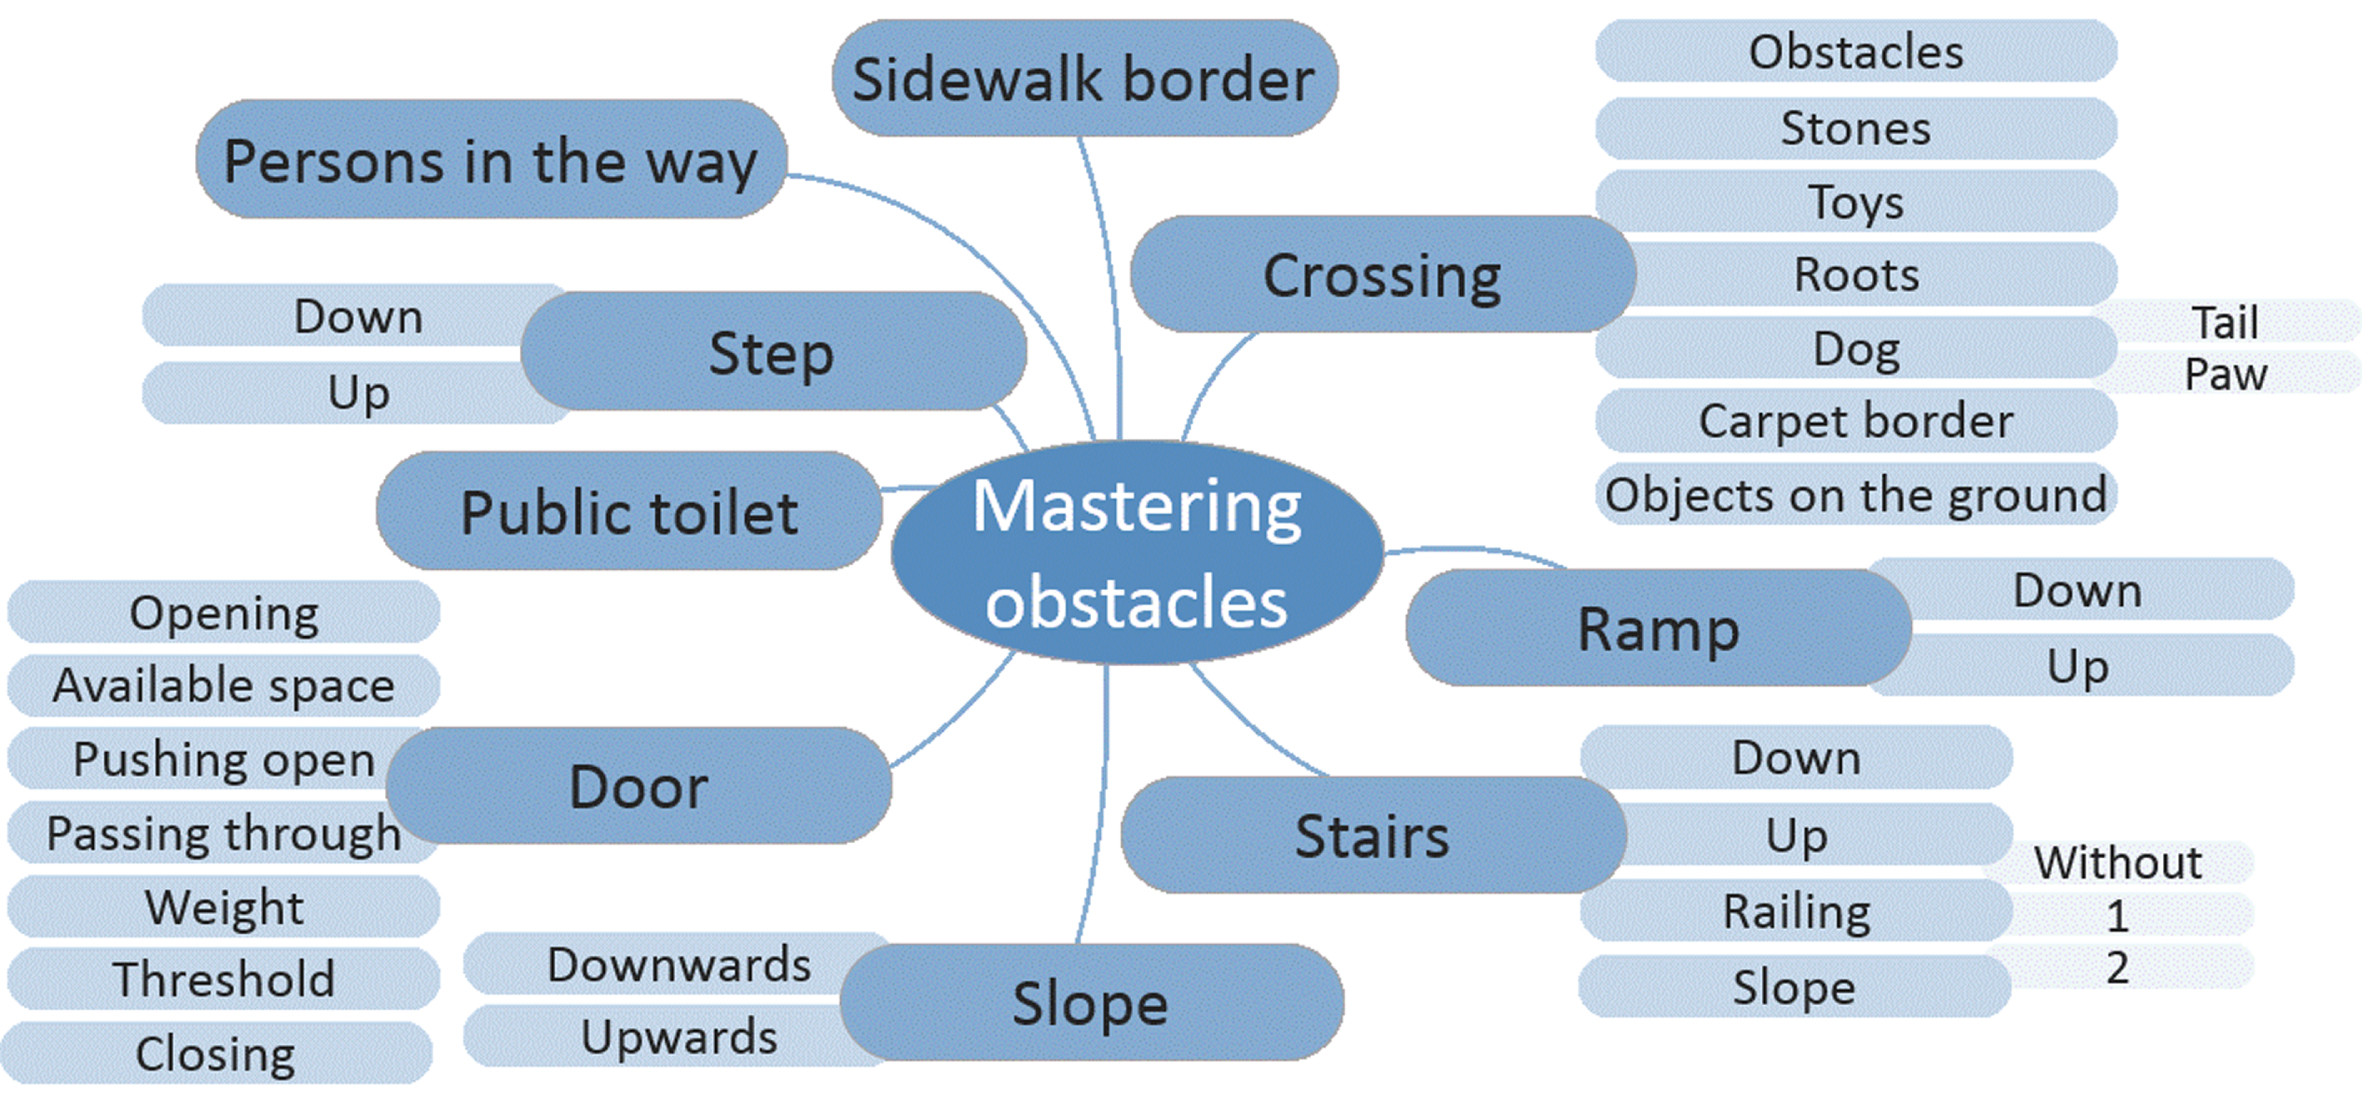 Mind-map of activities mentioned by the parents and adolescents related to mastering obstacles.